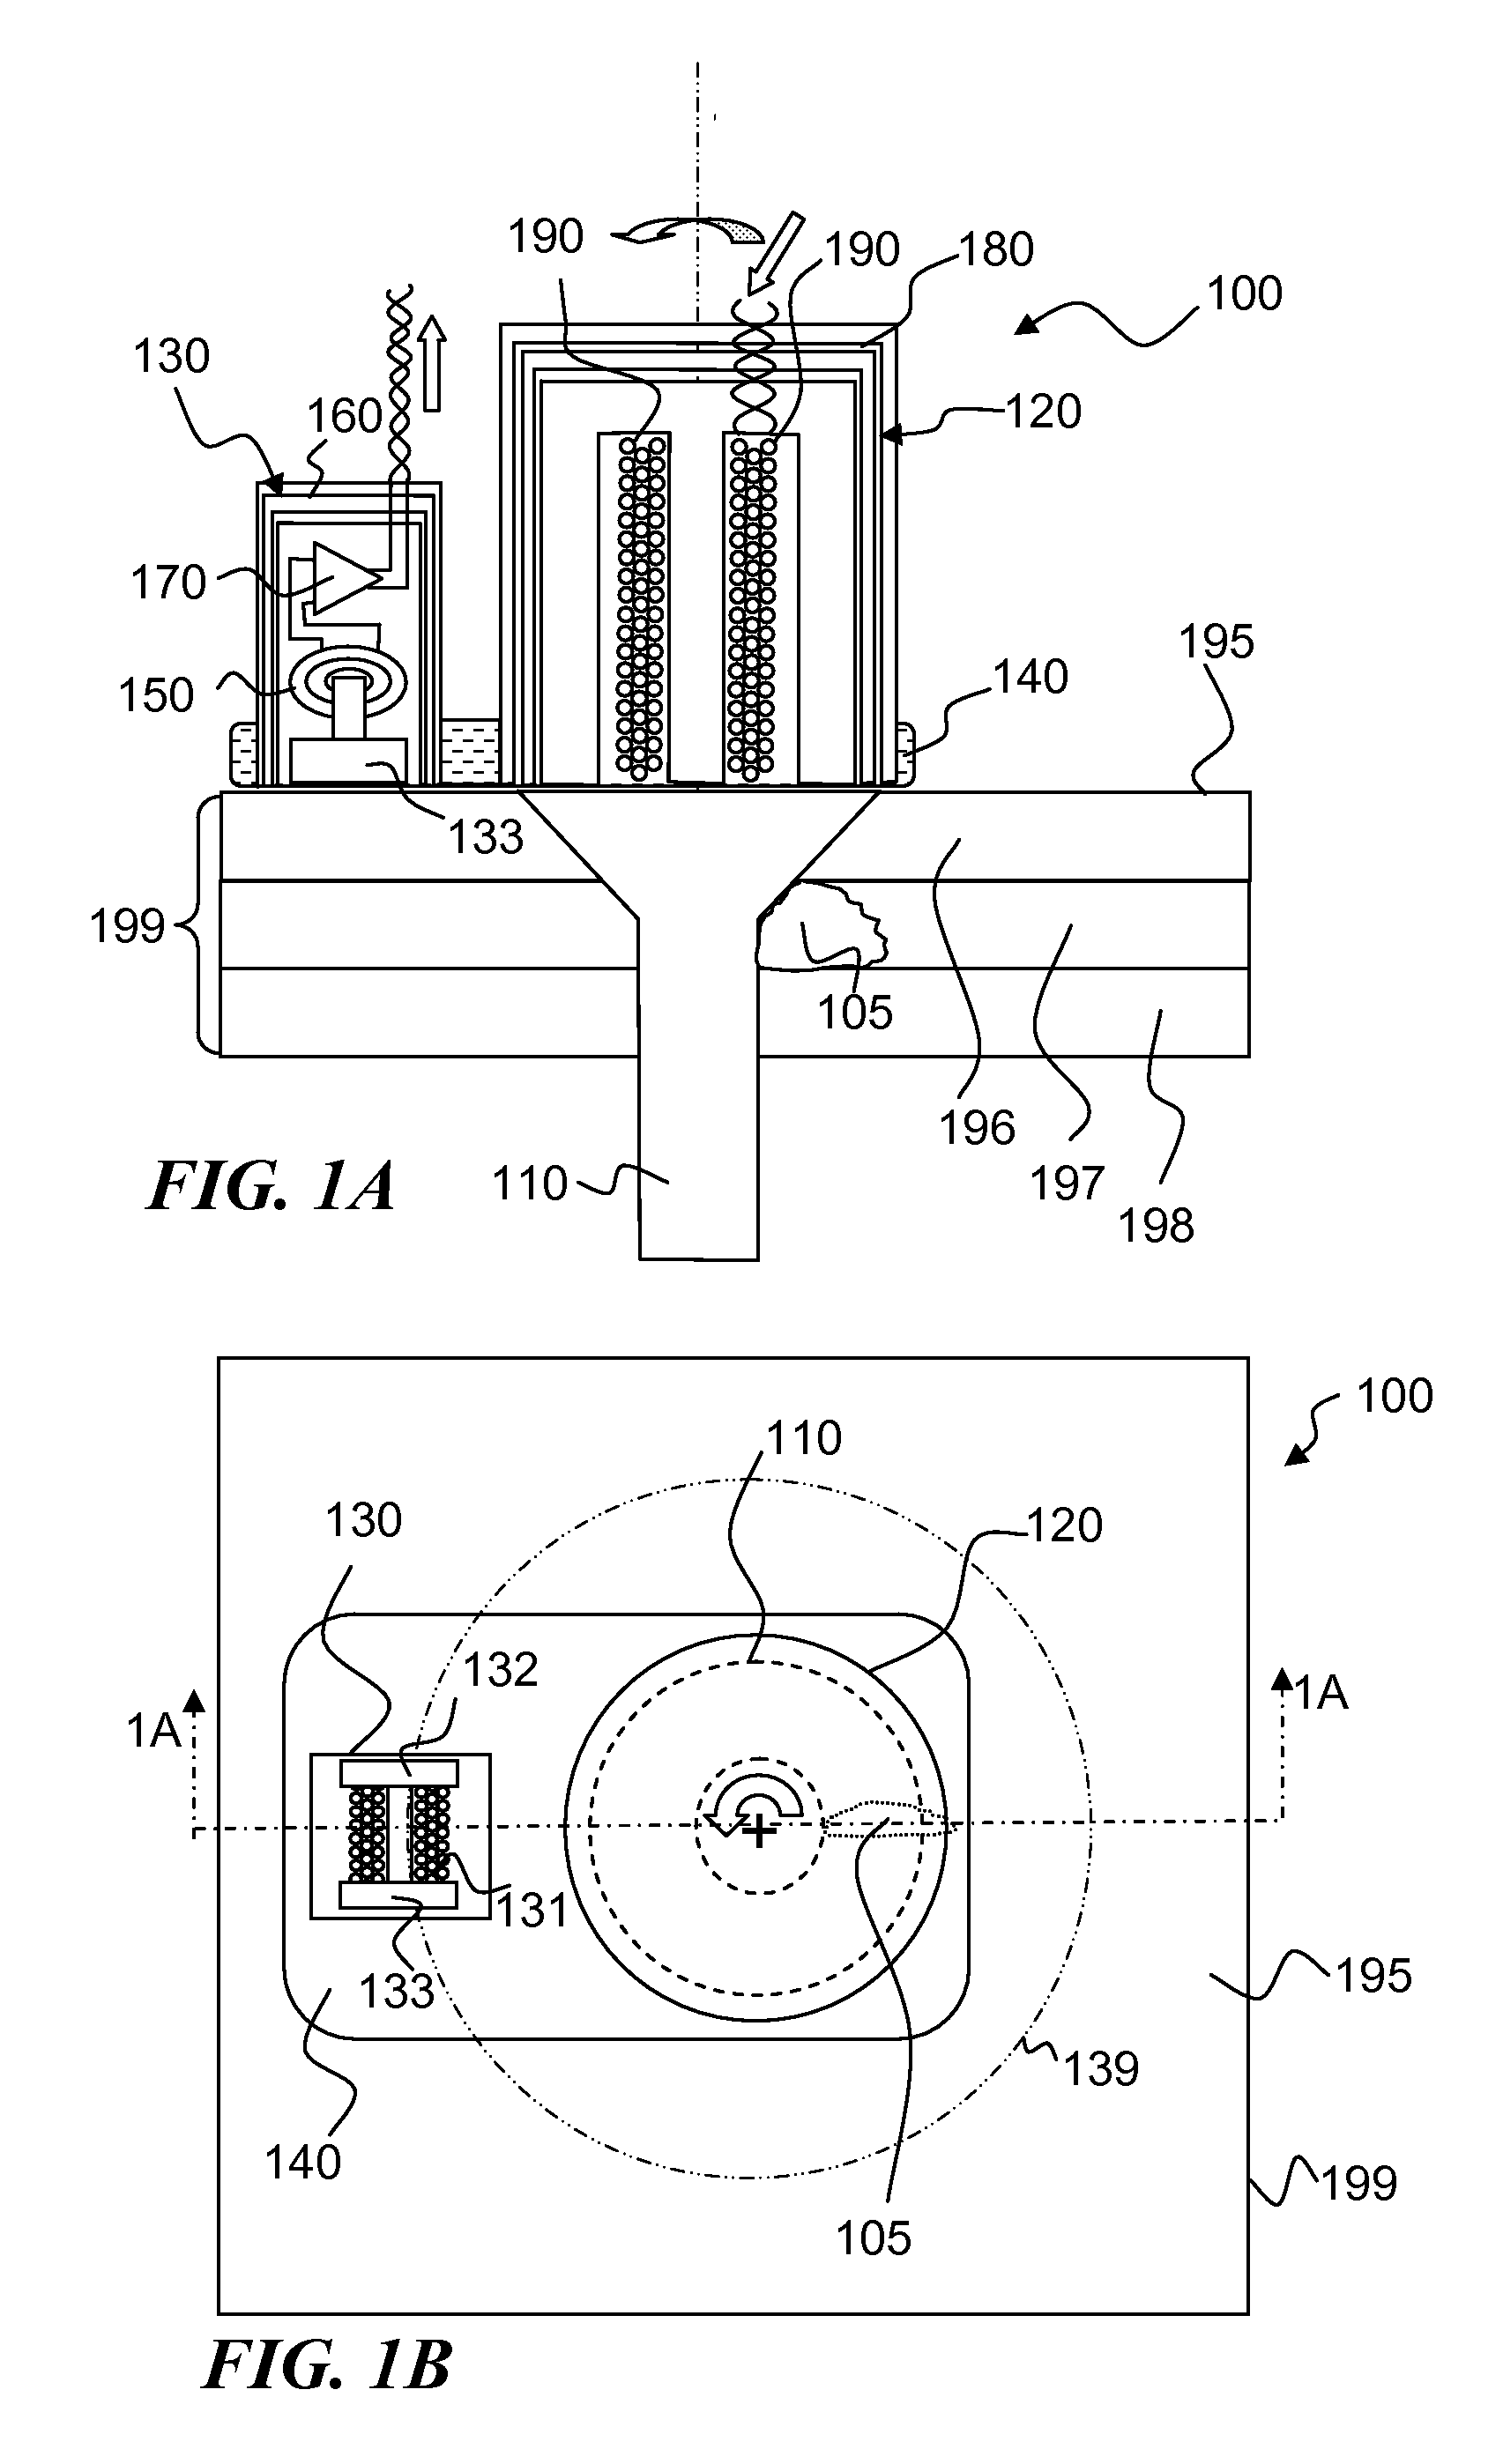 Apparatus and method for holding a rotatable eddy-current magnetic probe, and for rotating the probe around a boundary